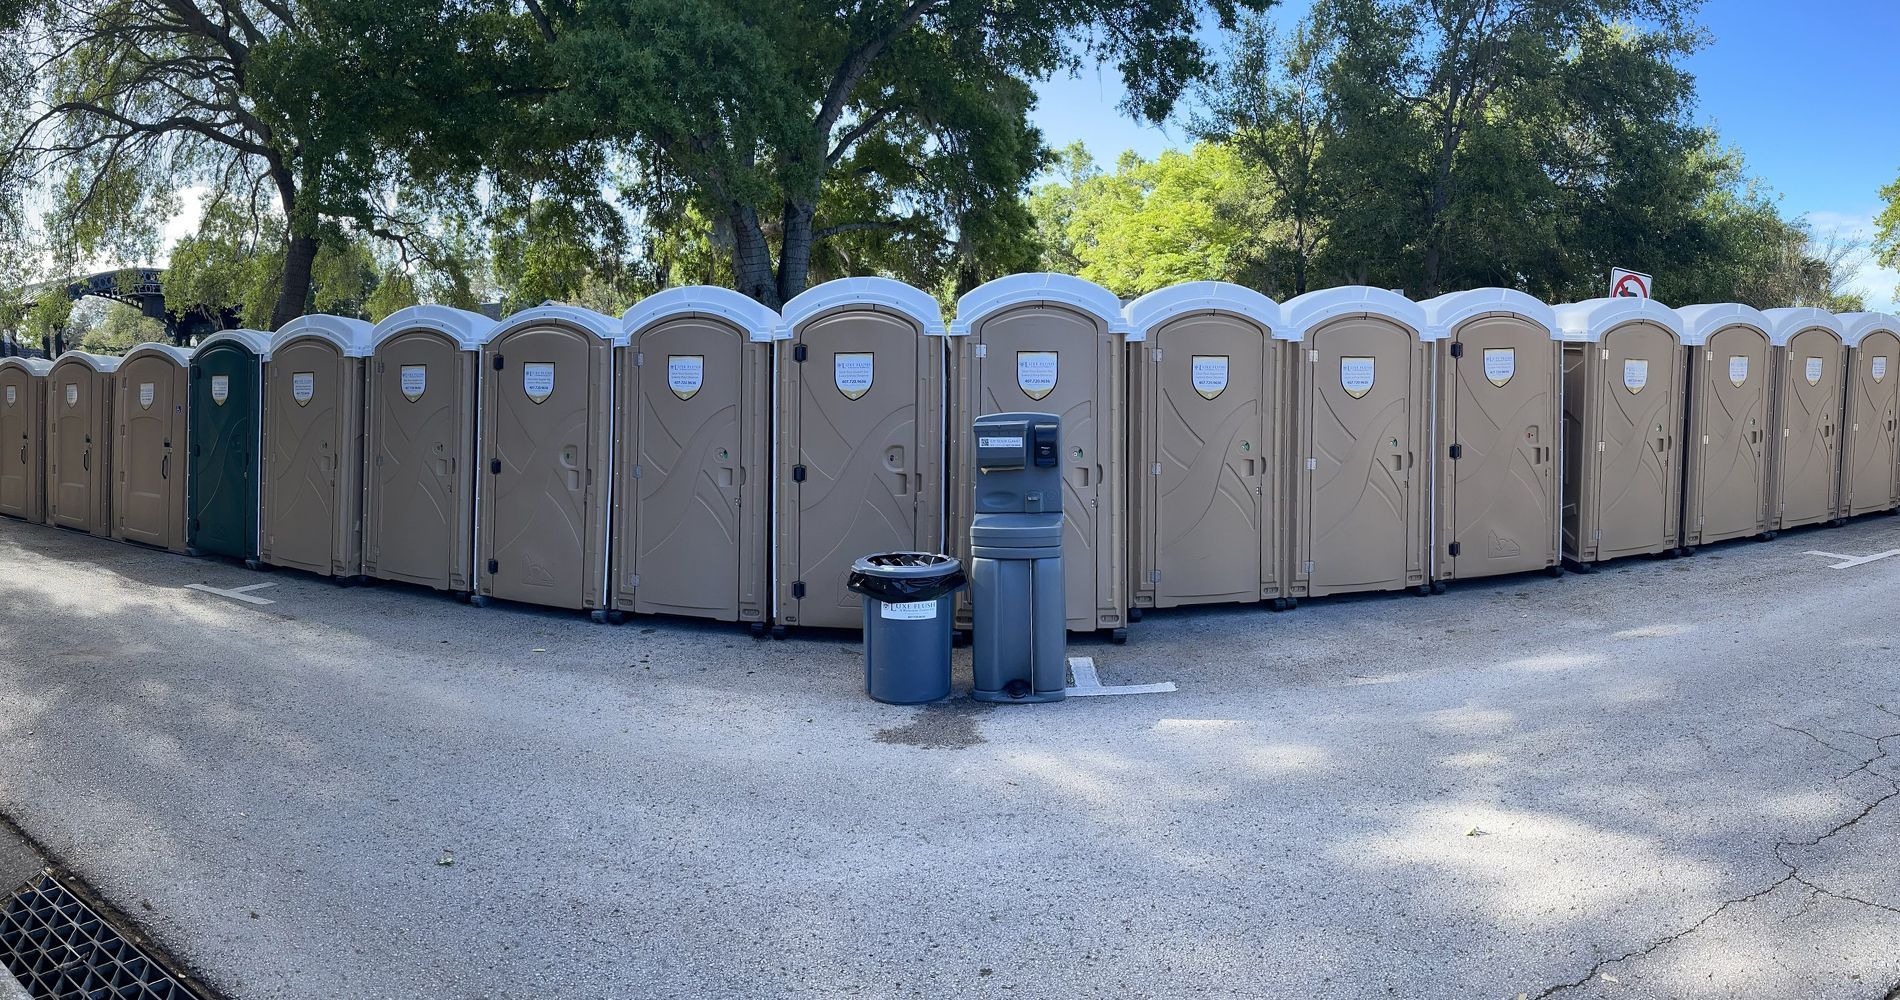 Luxe Flush Restroom Trailers